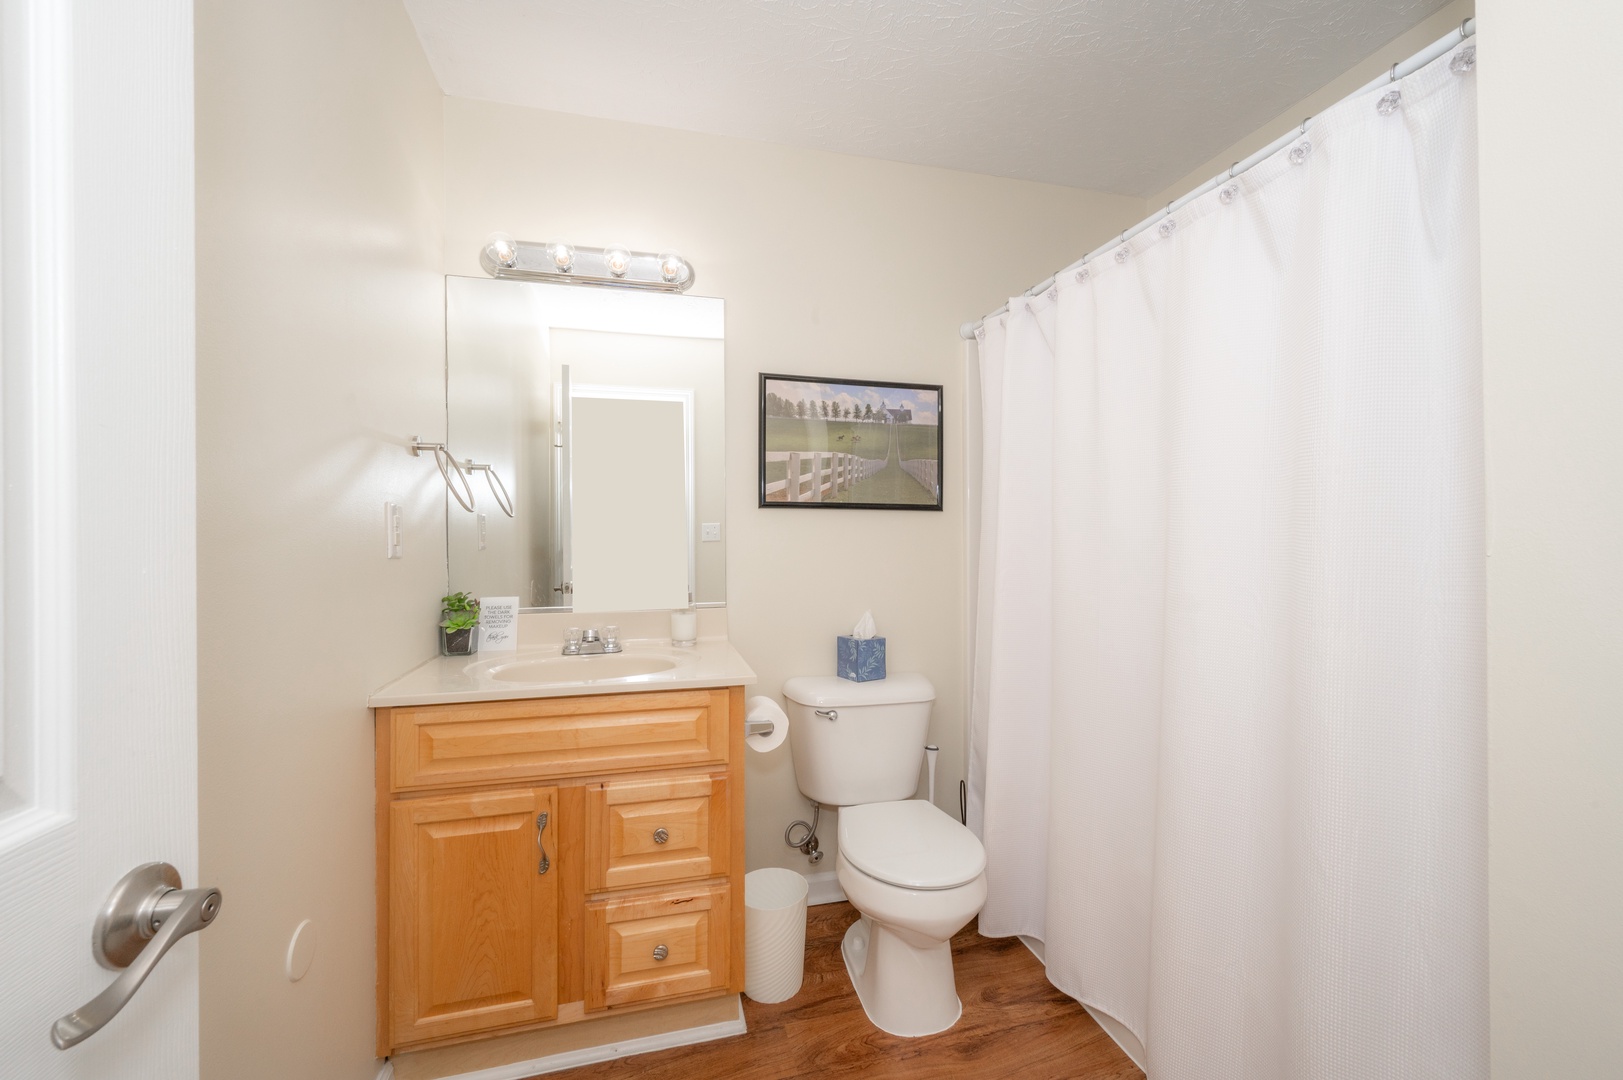 This upper-level full bath includes a single vanity & shower/tub combo